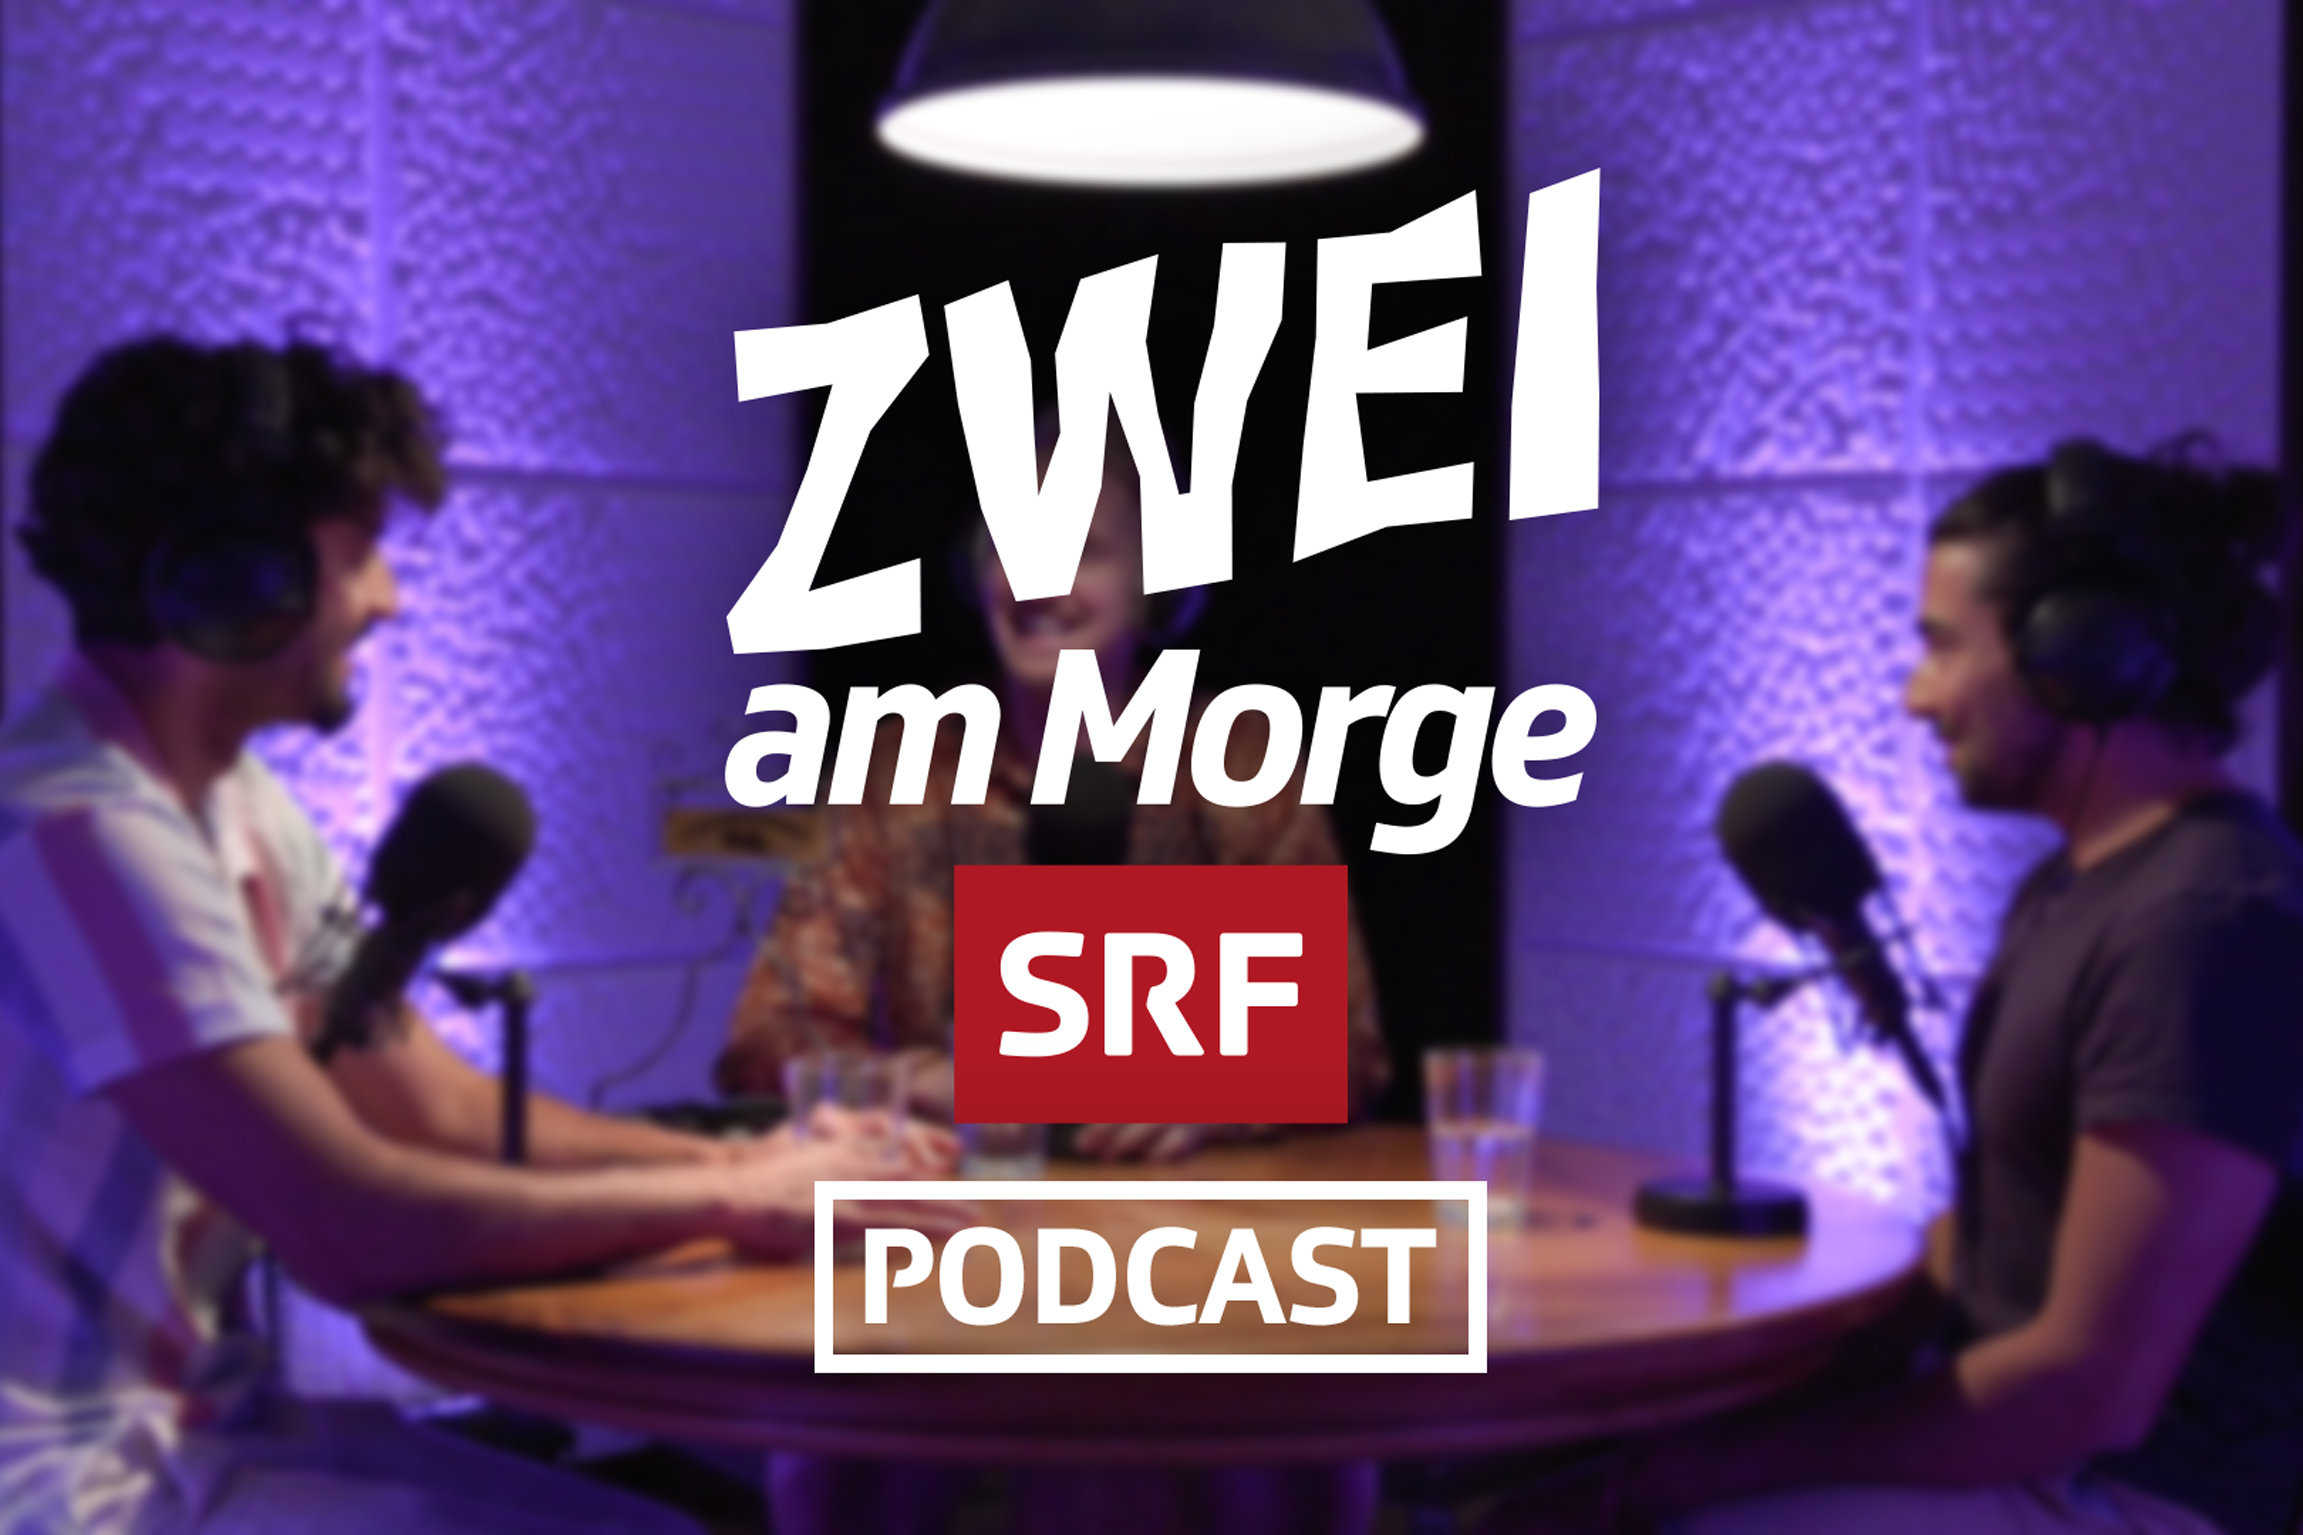 Zwei am Morge Podcast Keyvisual